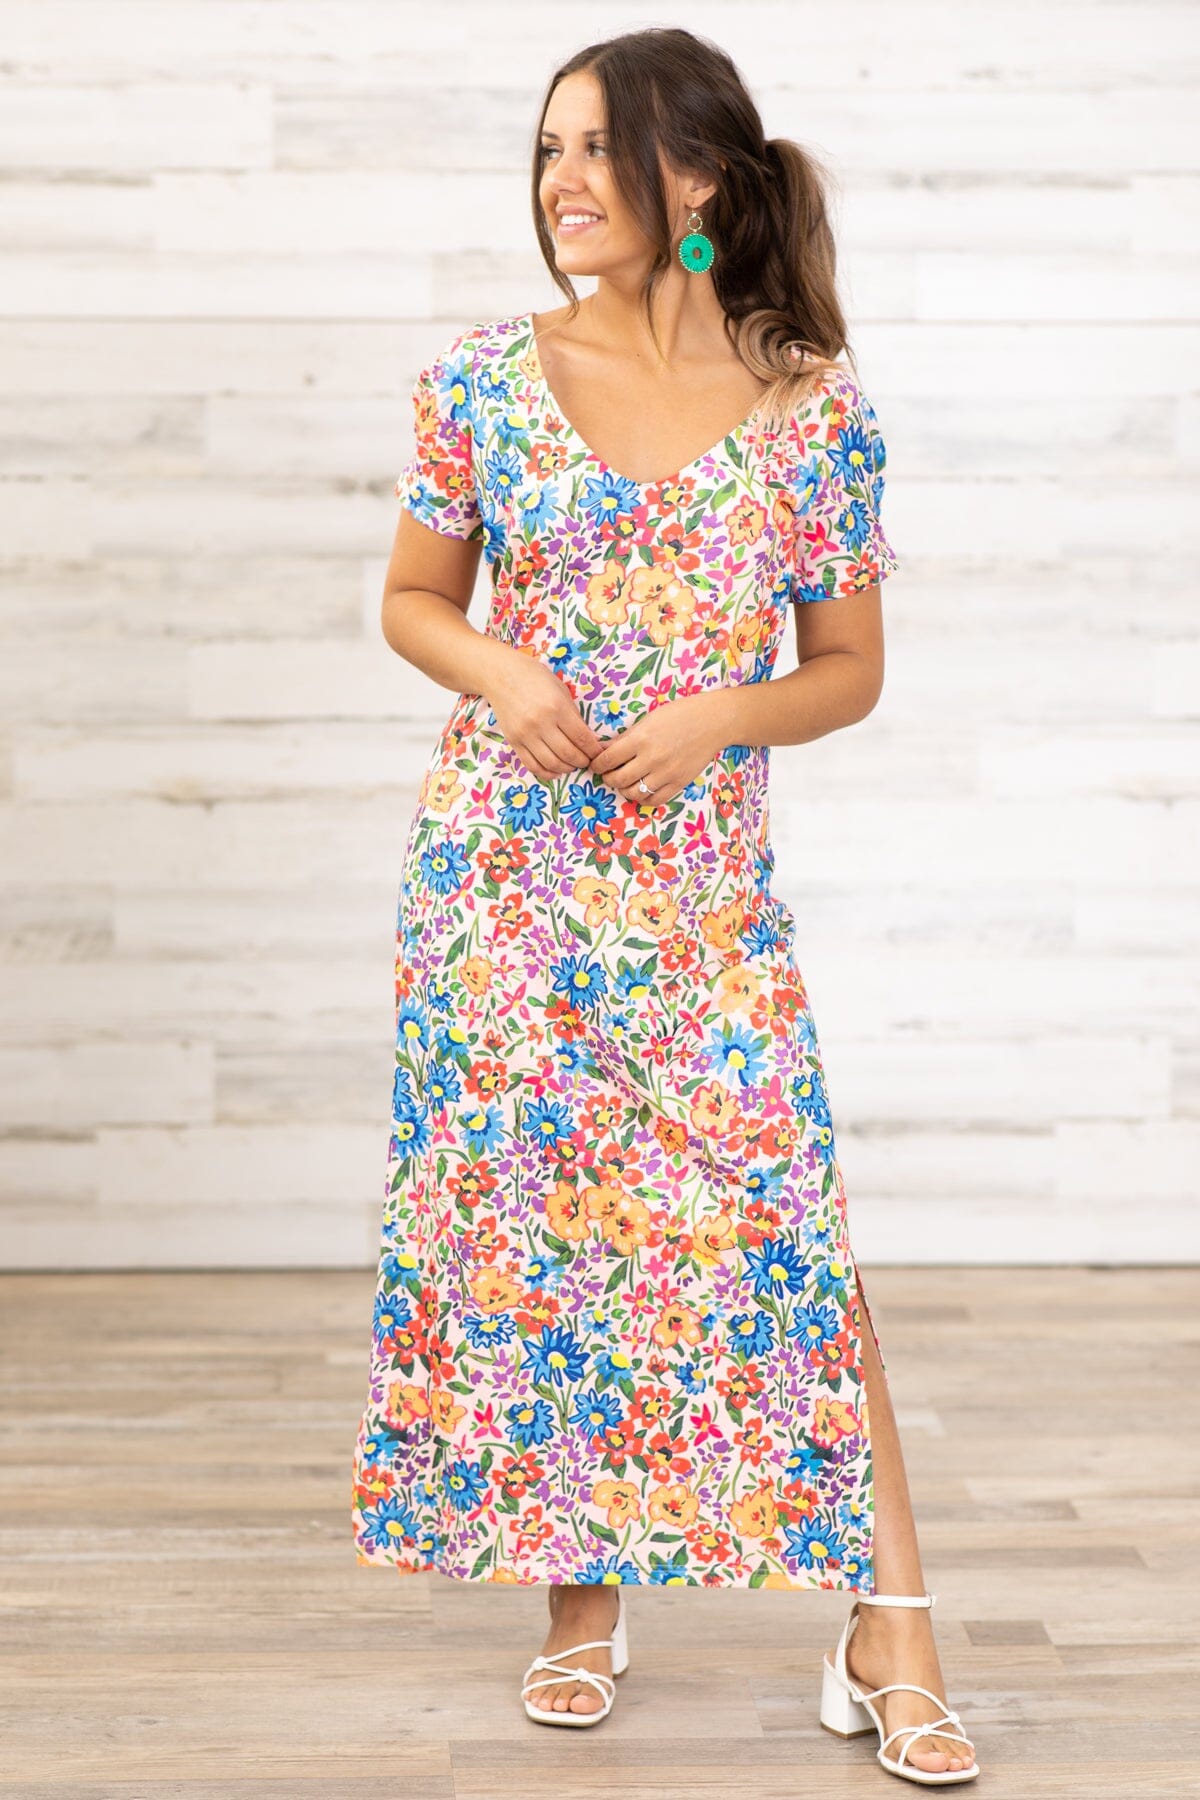 Sky Blue and Pink Floral Print Maxi Dress - Filly Flair